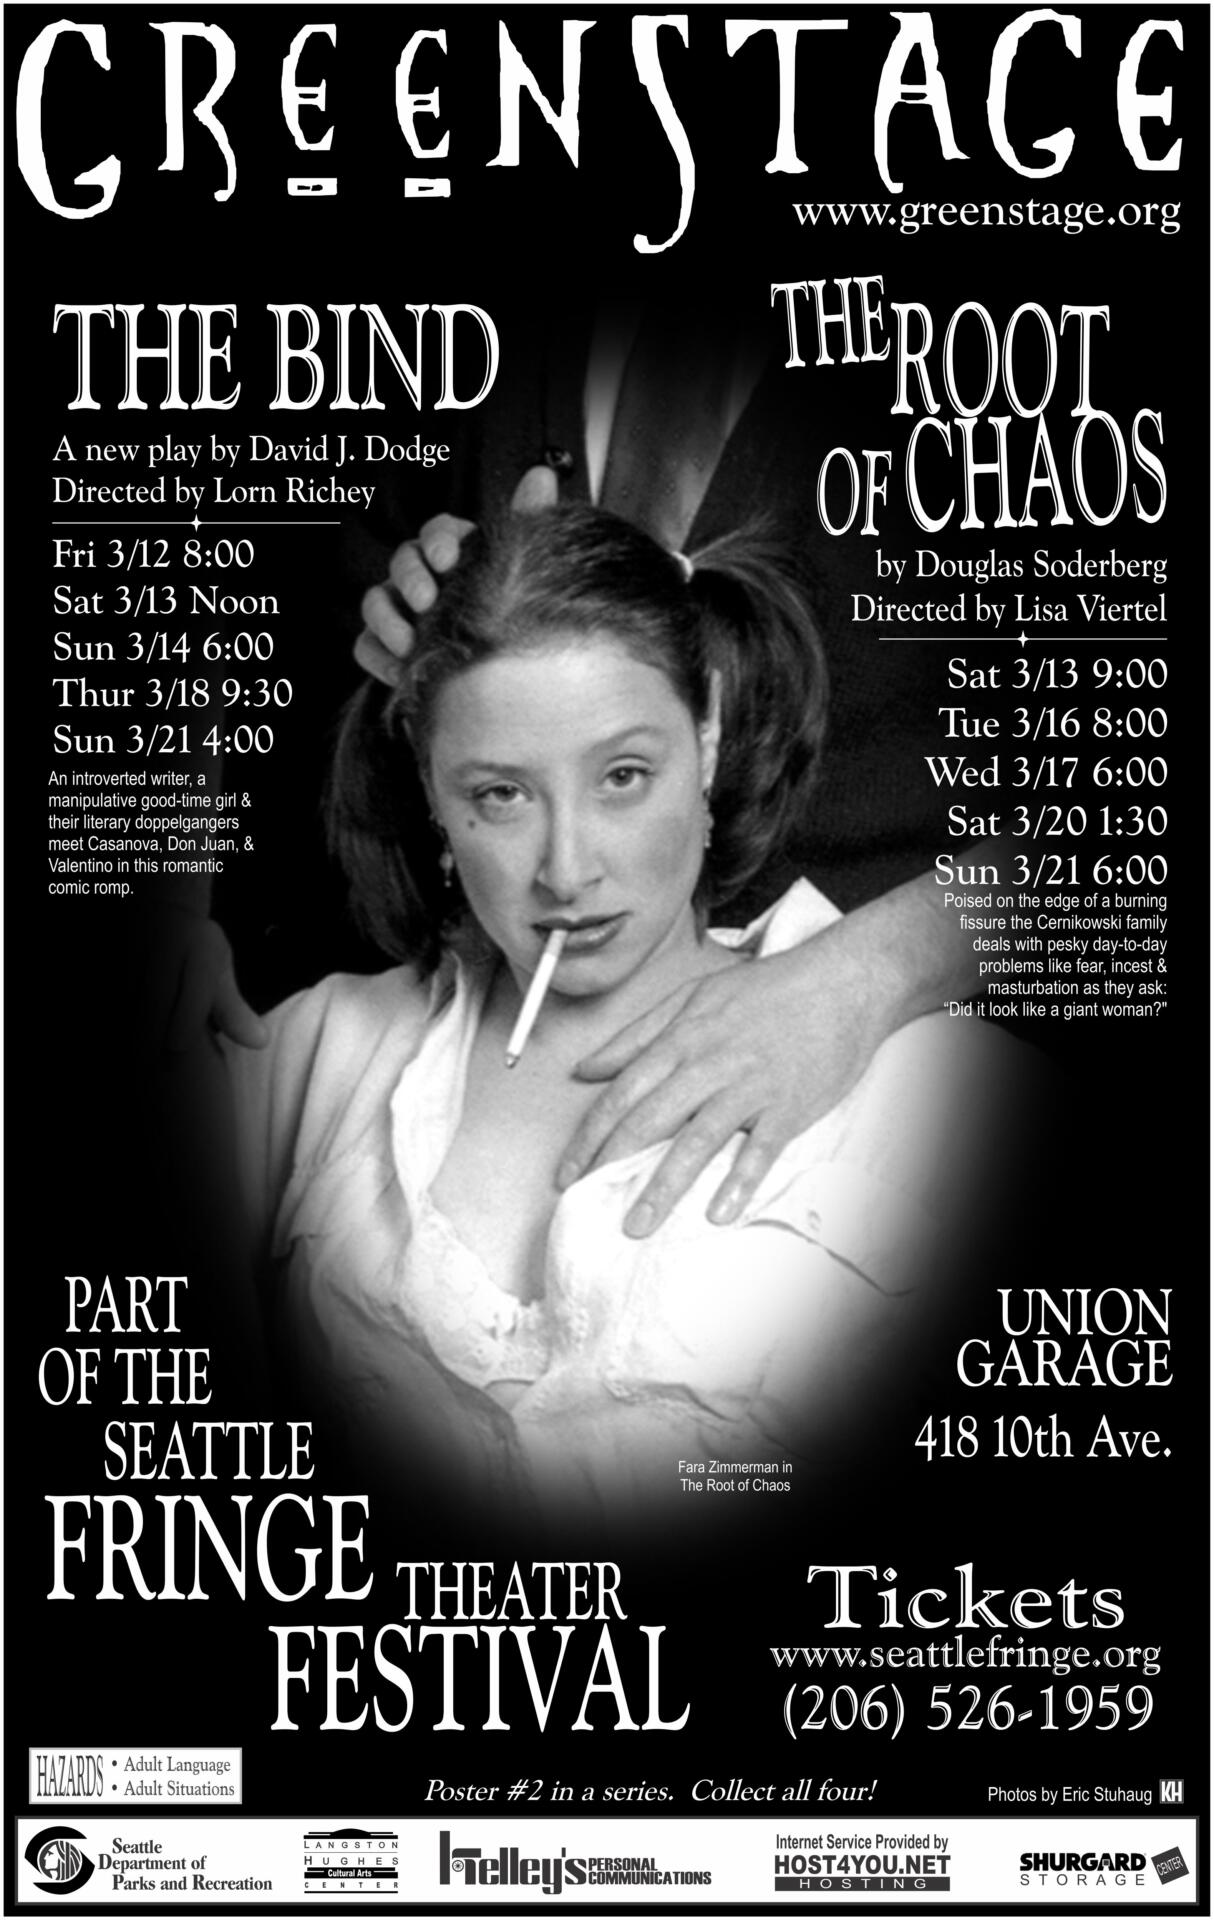 Fringe Festival poster from 1999. Four different posters were used. This one features Fara Zimmerman